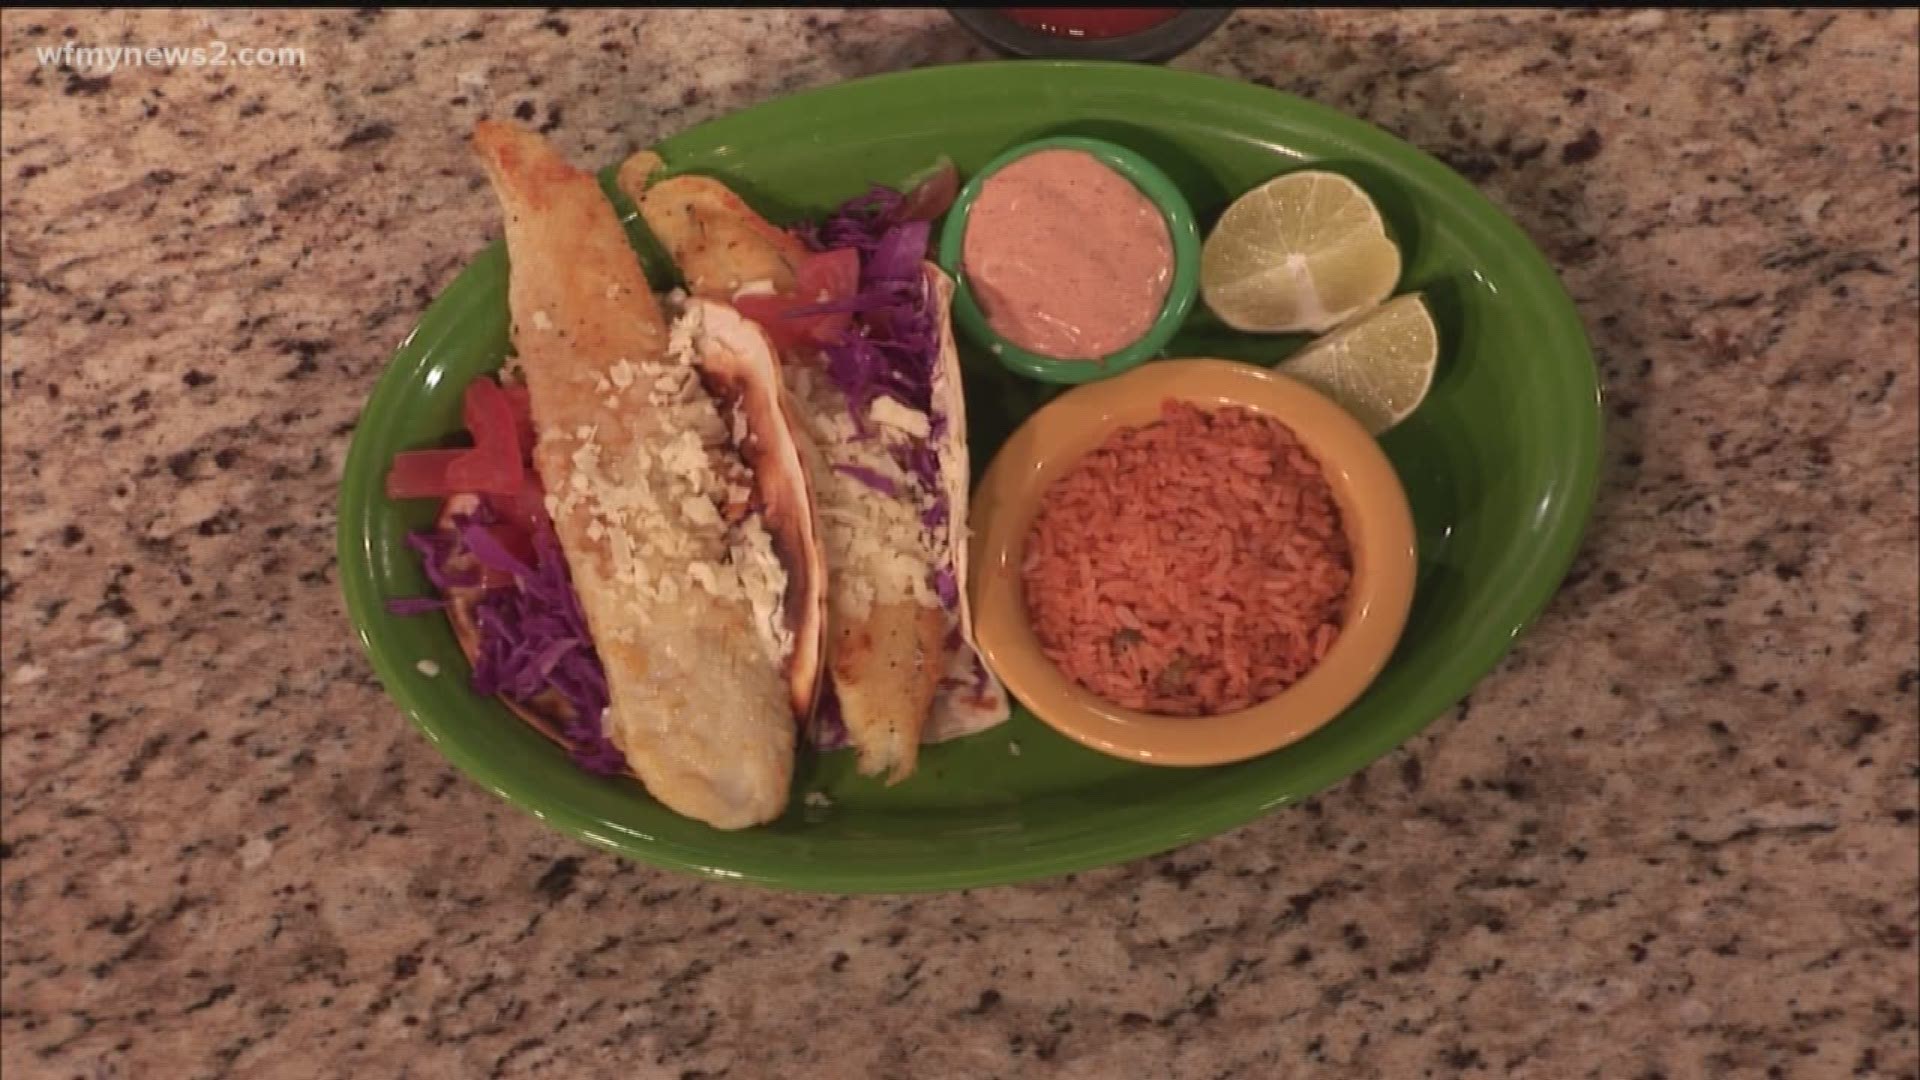 Cooking fish tacos and more seafood in the News 2 kitchen.